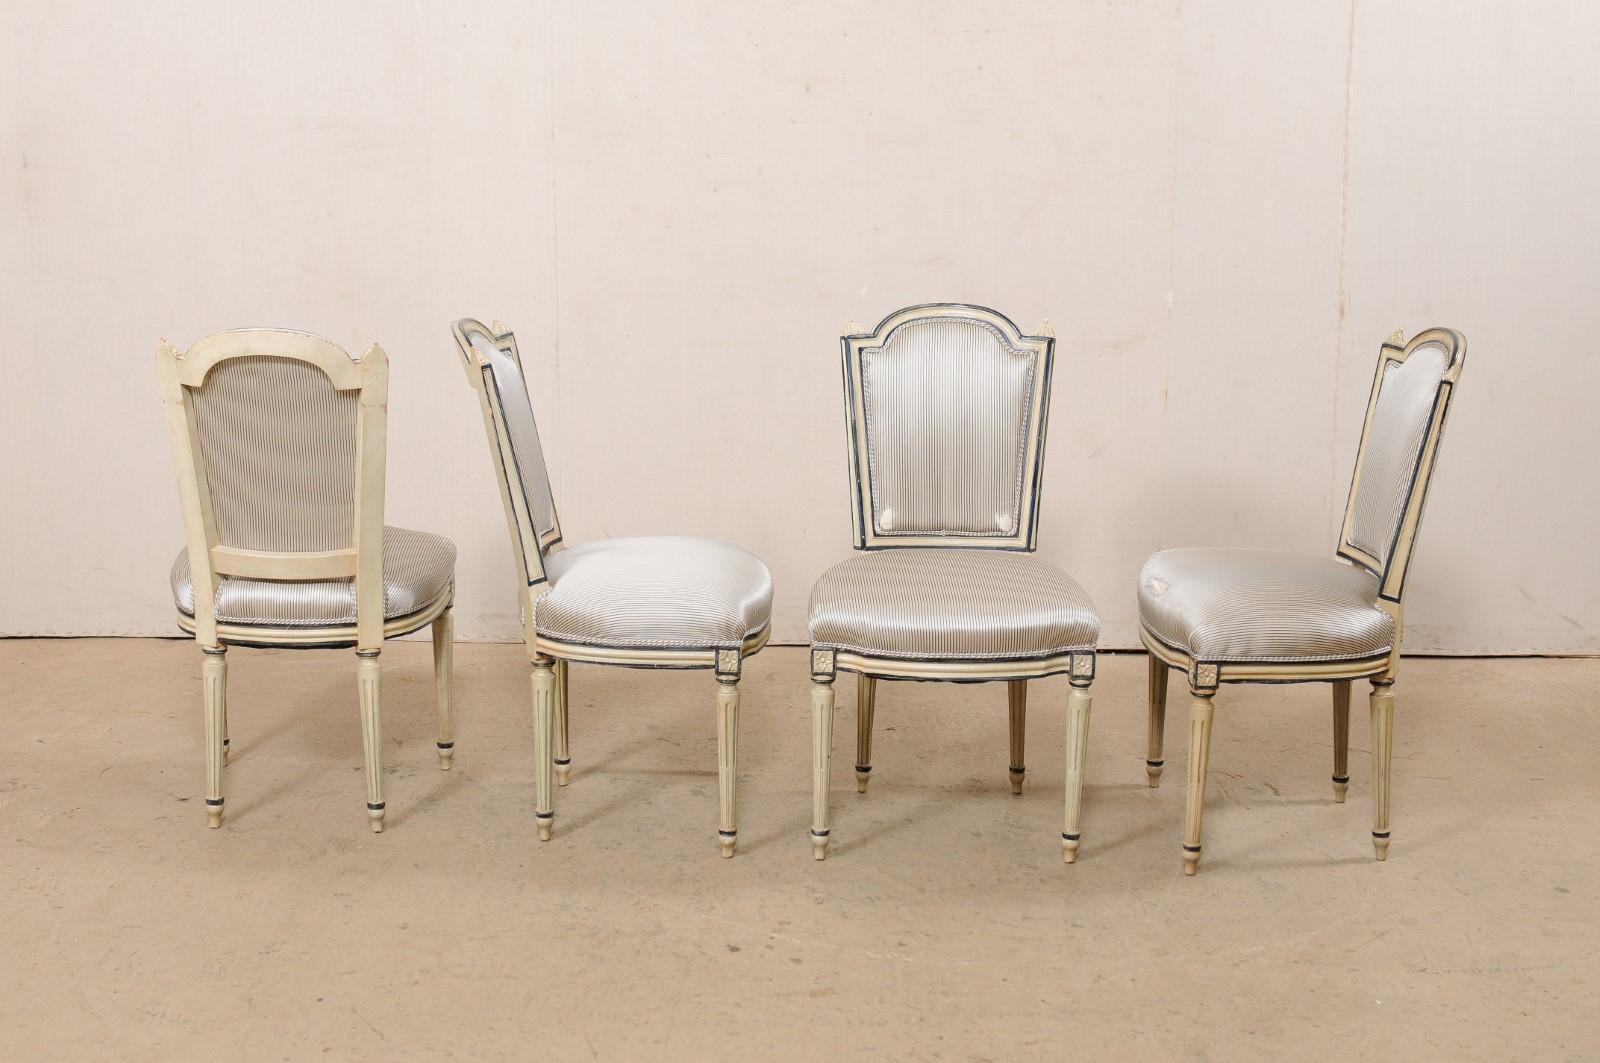 French Set of 4 Carved & Painted Wood & Upholstered Side Chairs, Mid 20th C In Good Condition For Sale In Atlanta, GA